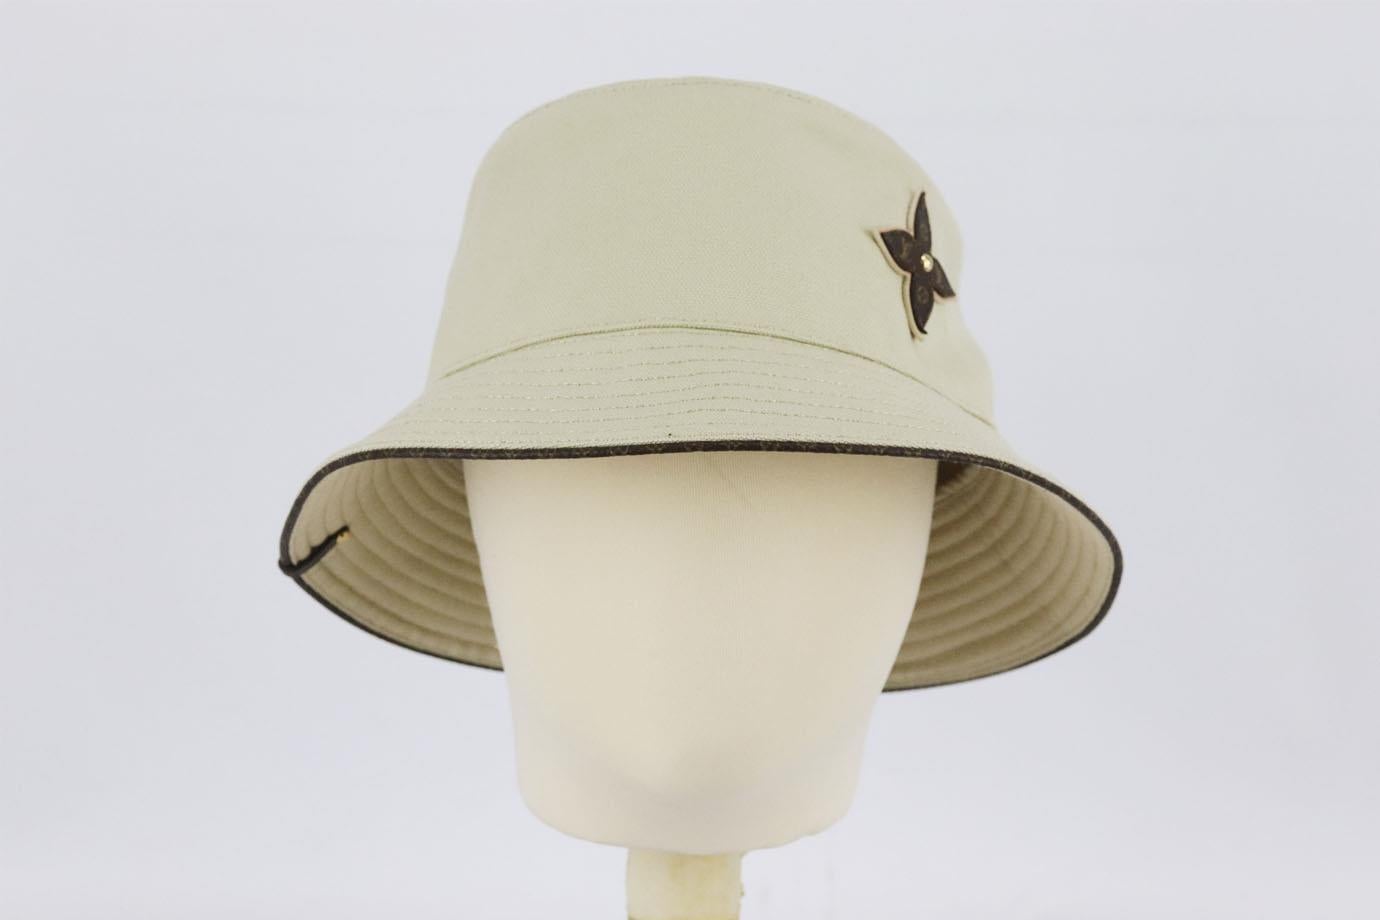 Louis Vuitton monogram appliquéd cotton canvas bucket hat. Beige. Slips on. Does not come with dustbag or box. 100% Cotton; coating: 100% polyester. Size: Small (56 cm). Brim Width:  2.2 in  Very good condition - As new condition, no sign of wear;